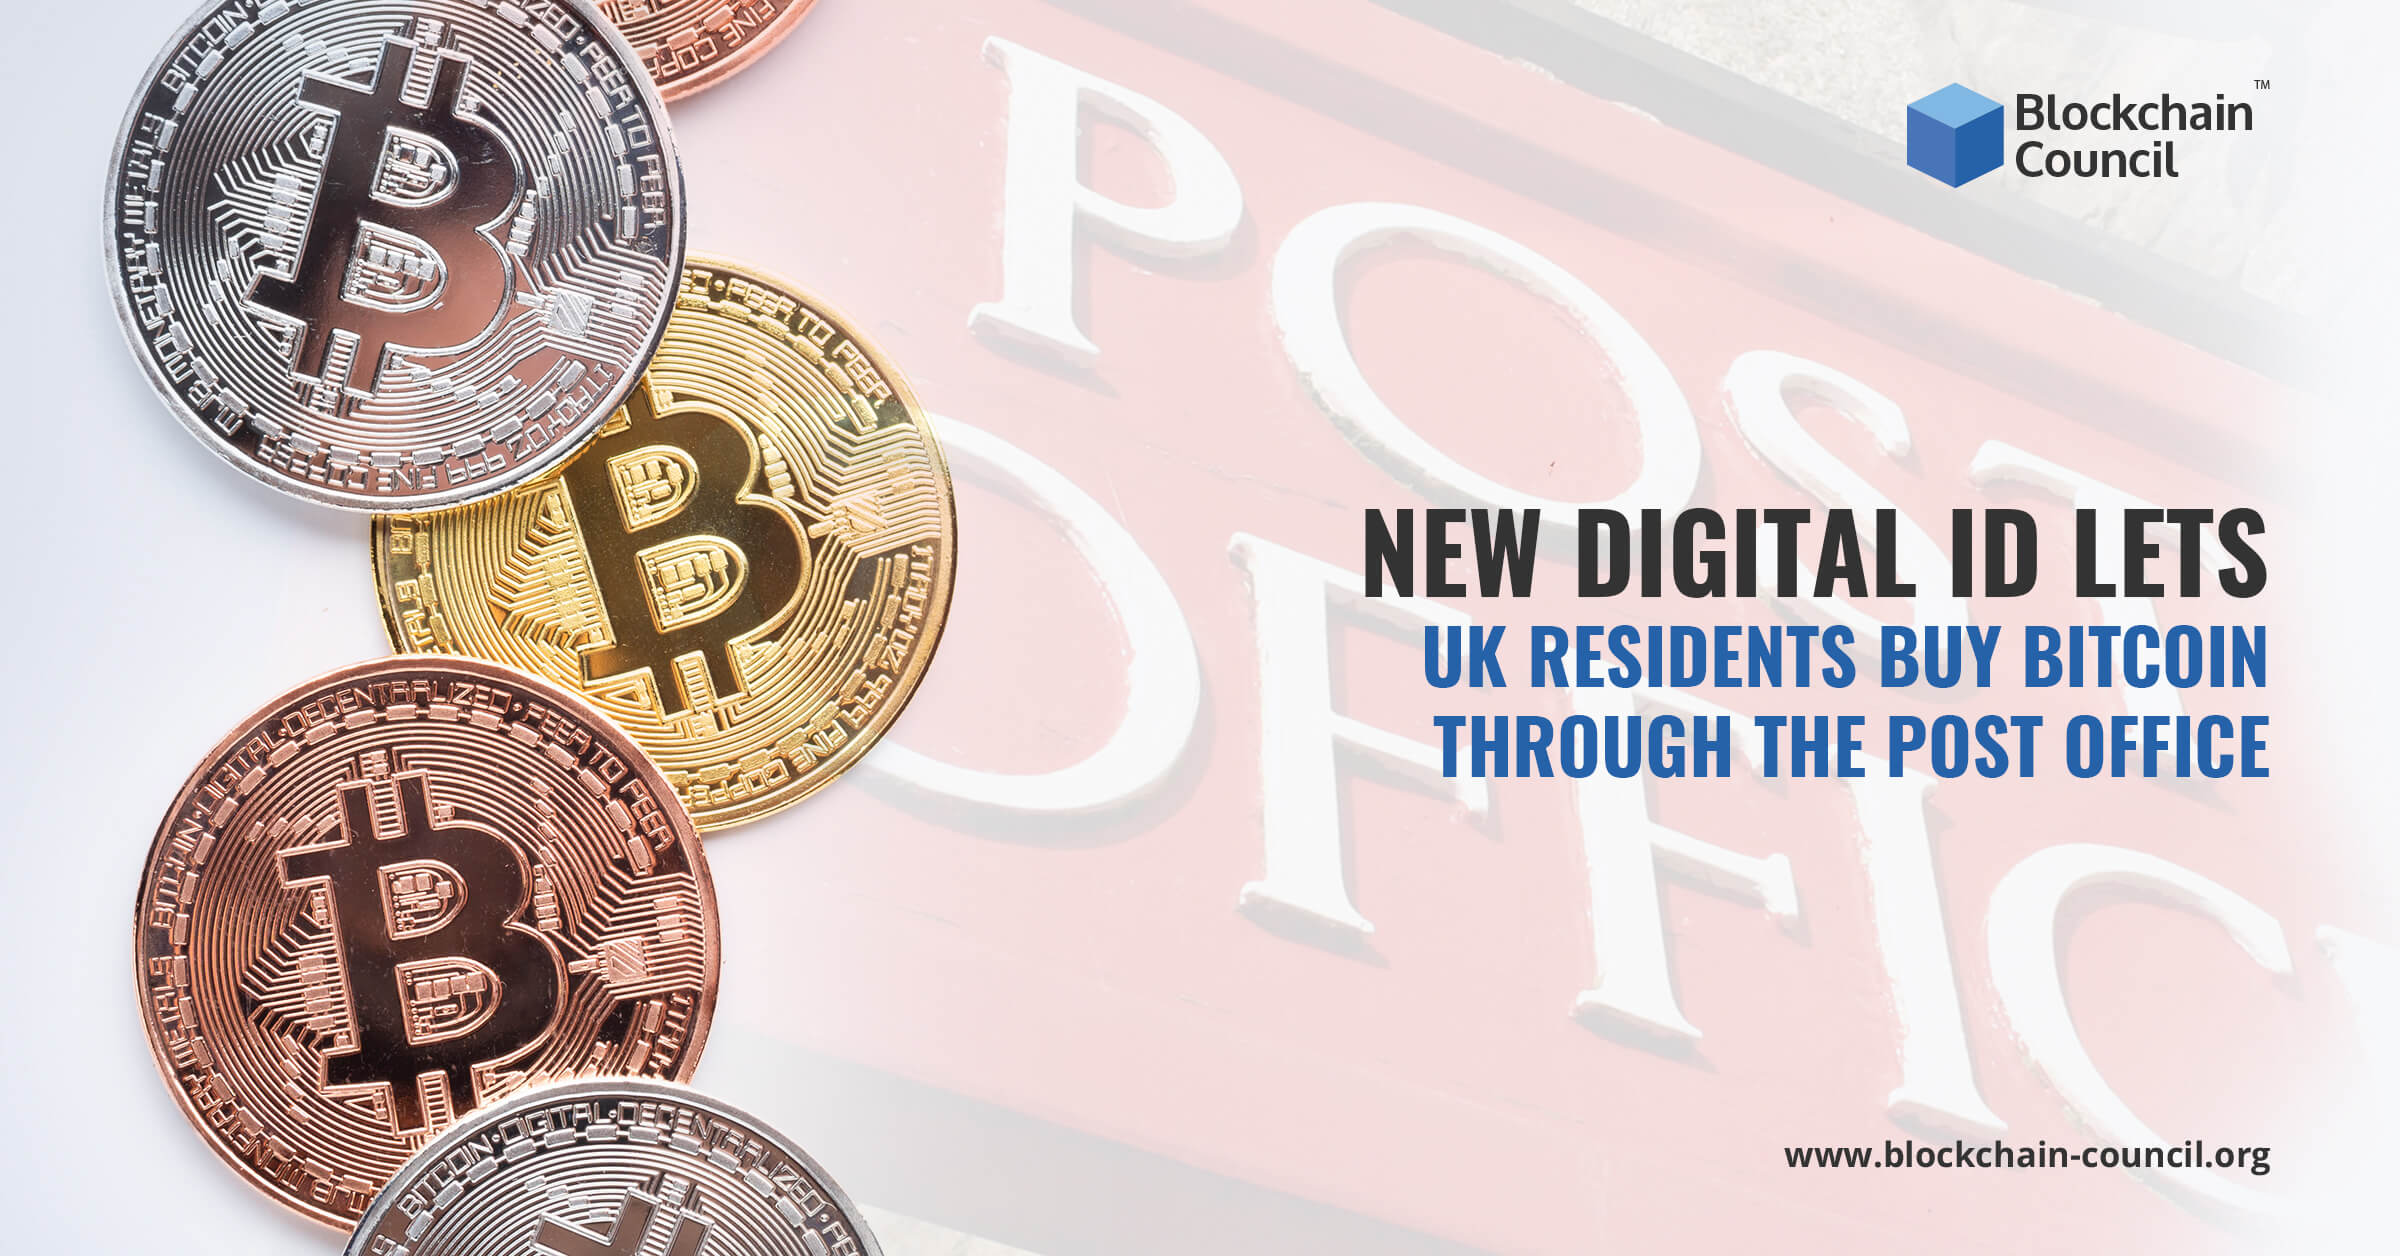 New Digital ID Lets UK Residents Buy Bitcoin Through the Post Office